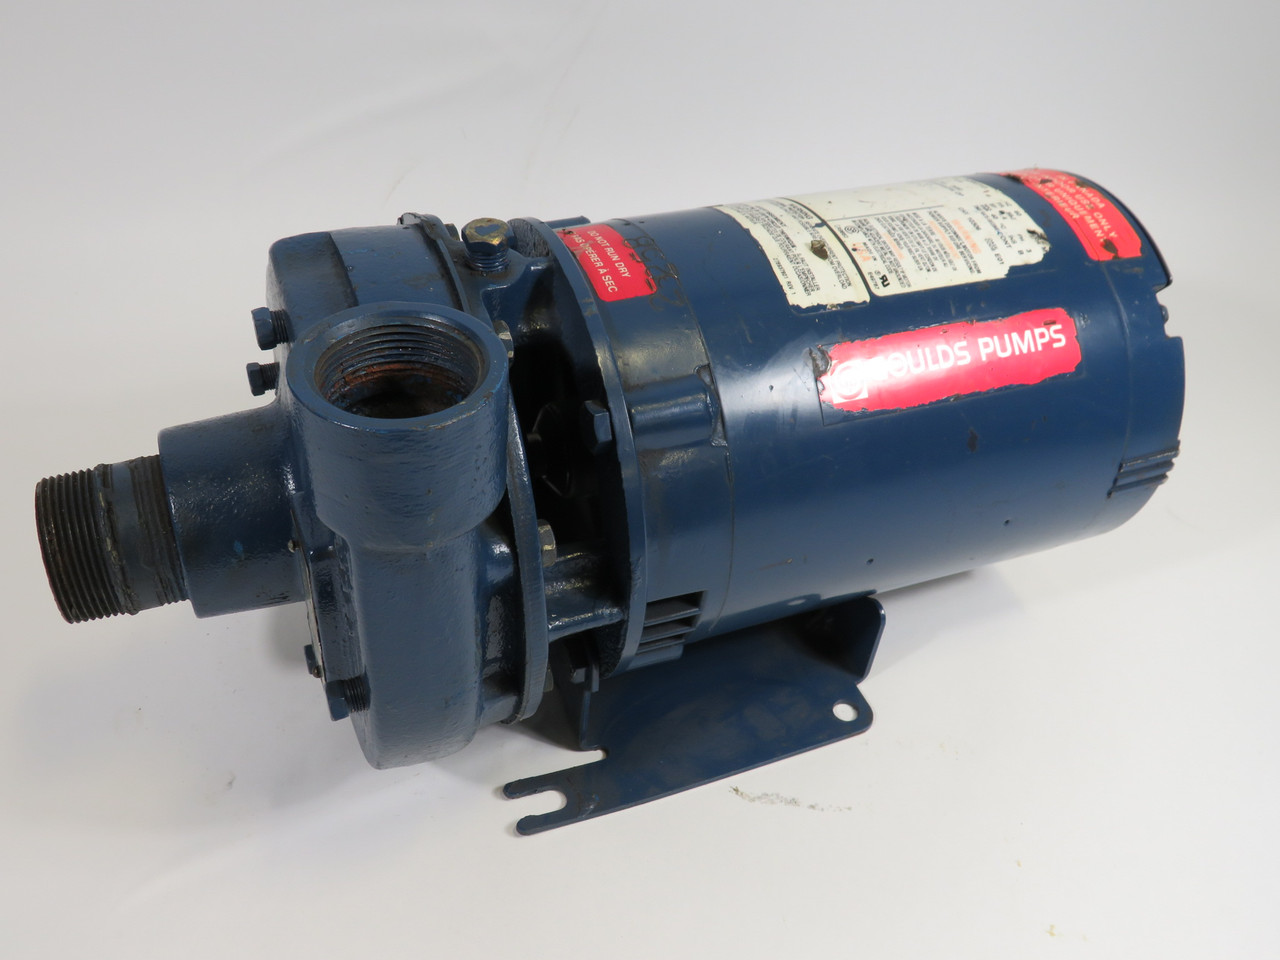 Goulds Pumps 2BF11037 Centrifugal Pump C/W Franklin Electric Motor DMG USED